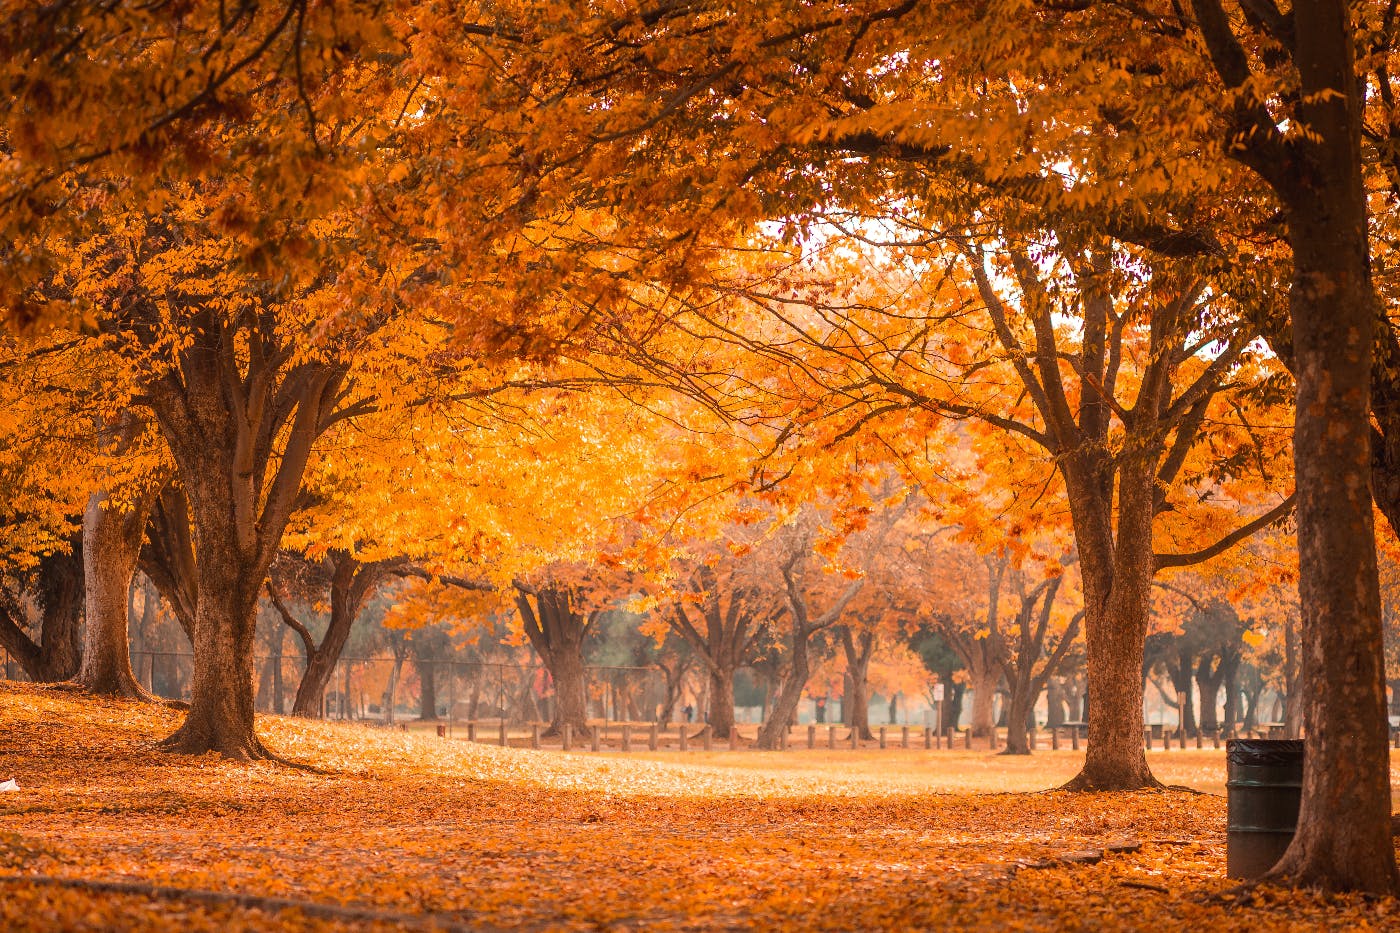 a park with the ground covered in colored leaves and the trees full of color